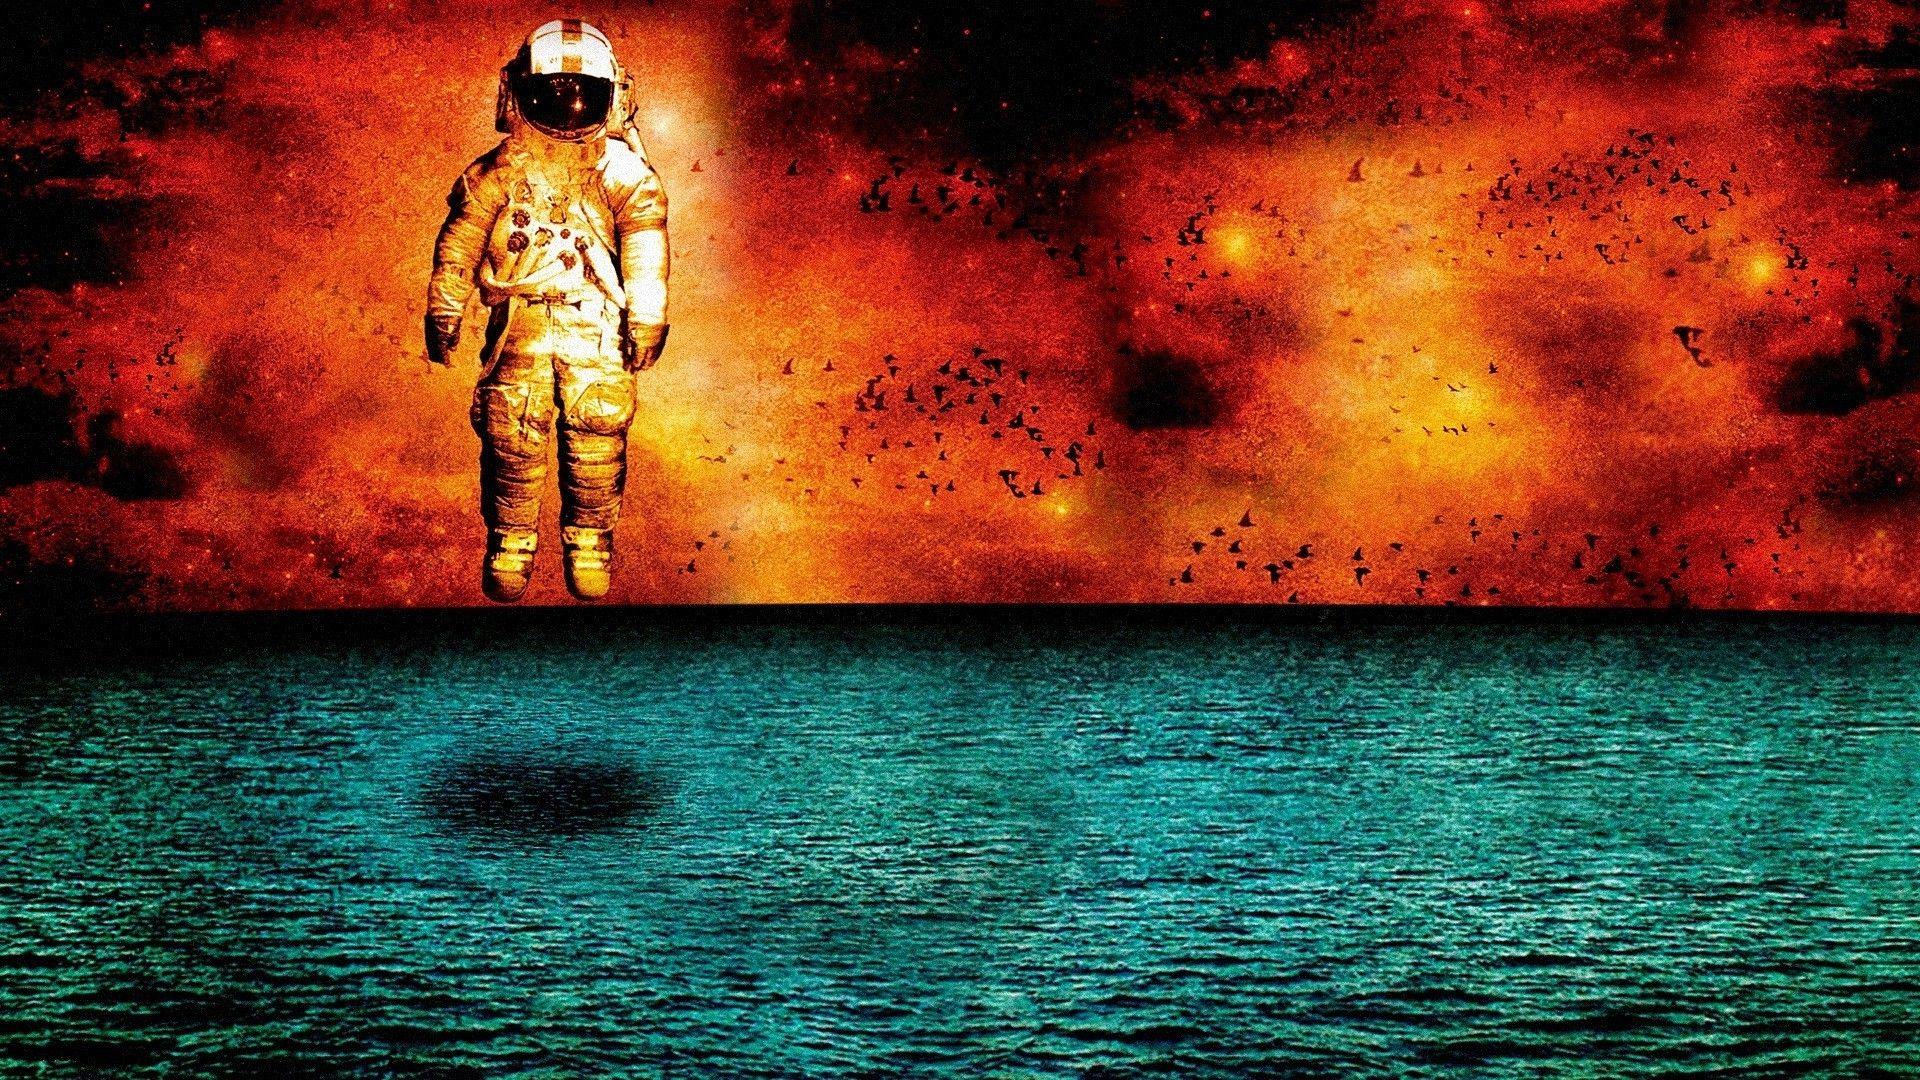 Astronaut On Fire Wallpapers - Top Free Astronaut On Fire Backgrounds